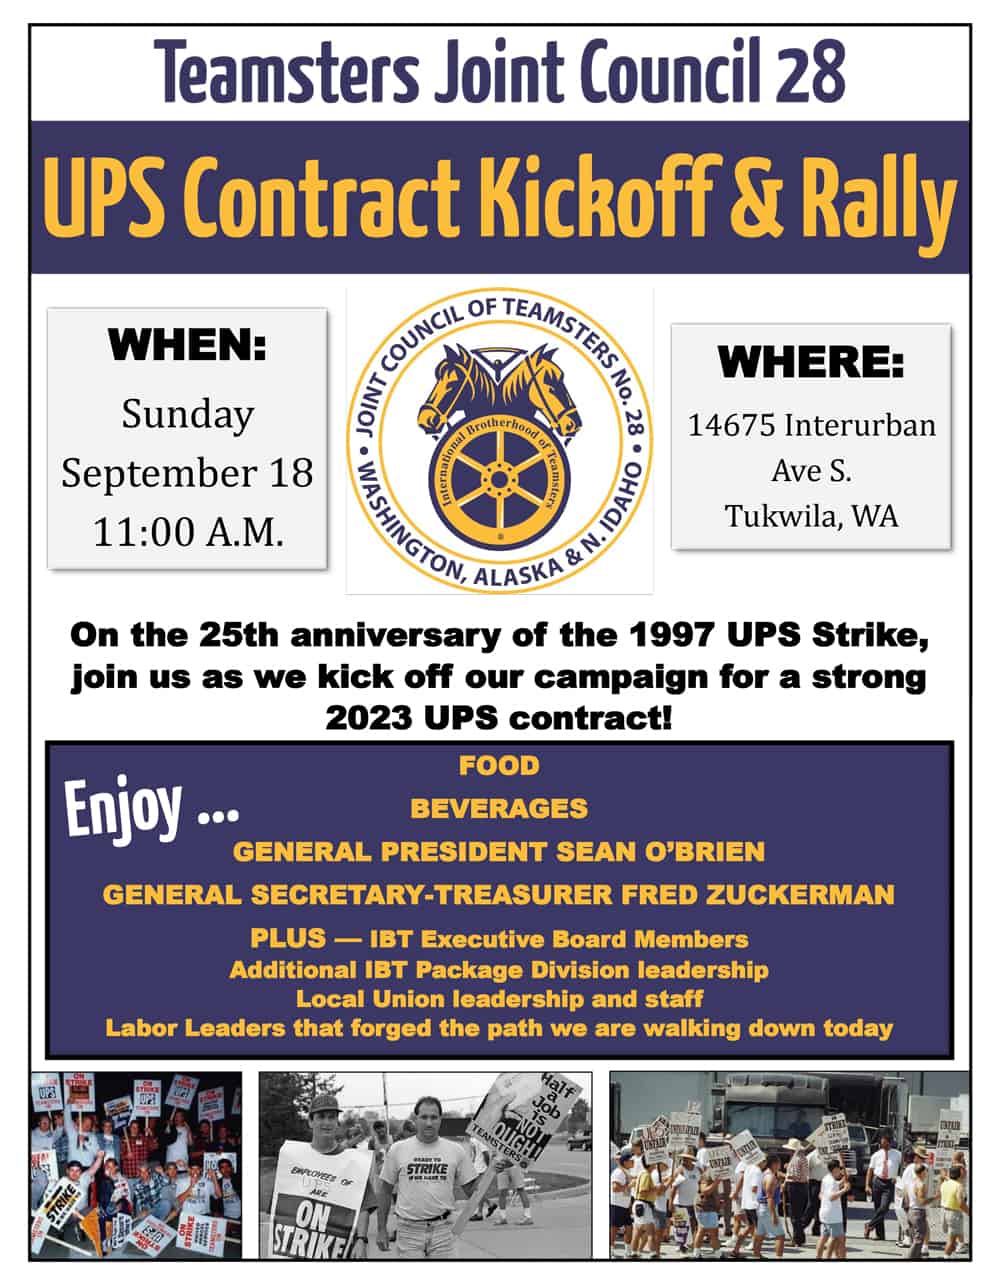 TEAMSTERS UPS CONTRACT KICKOFF & RALLY TEAMSTERS 58